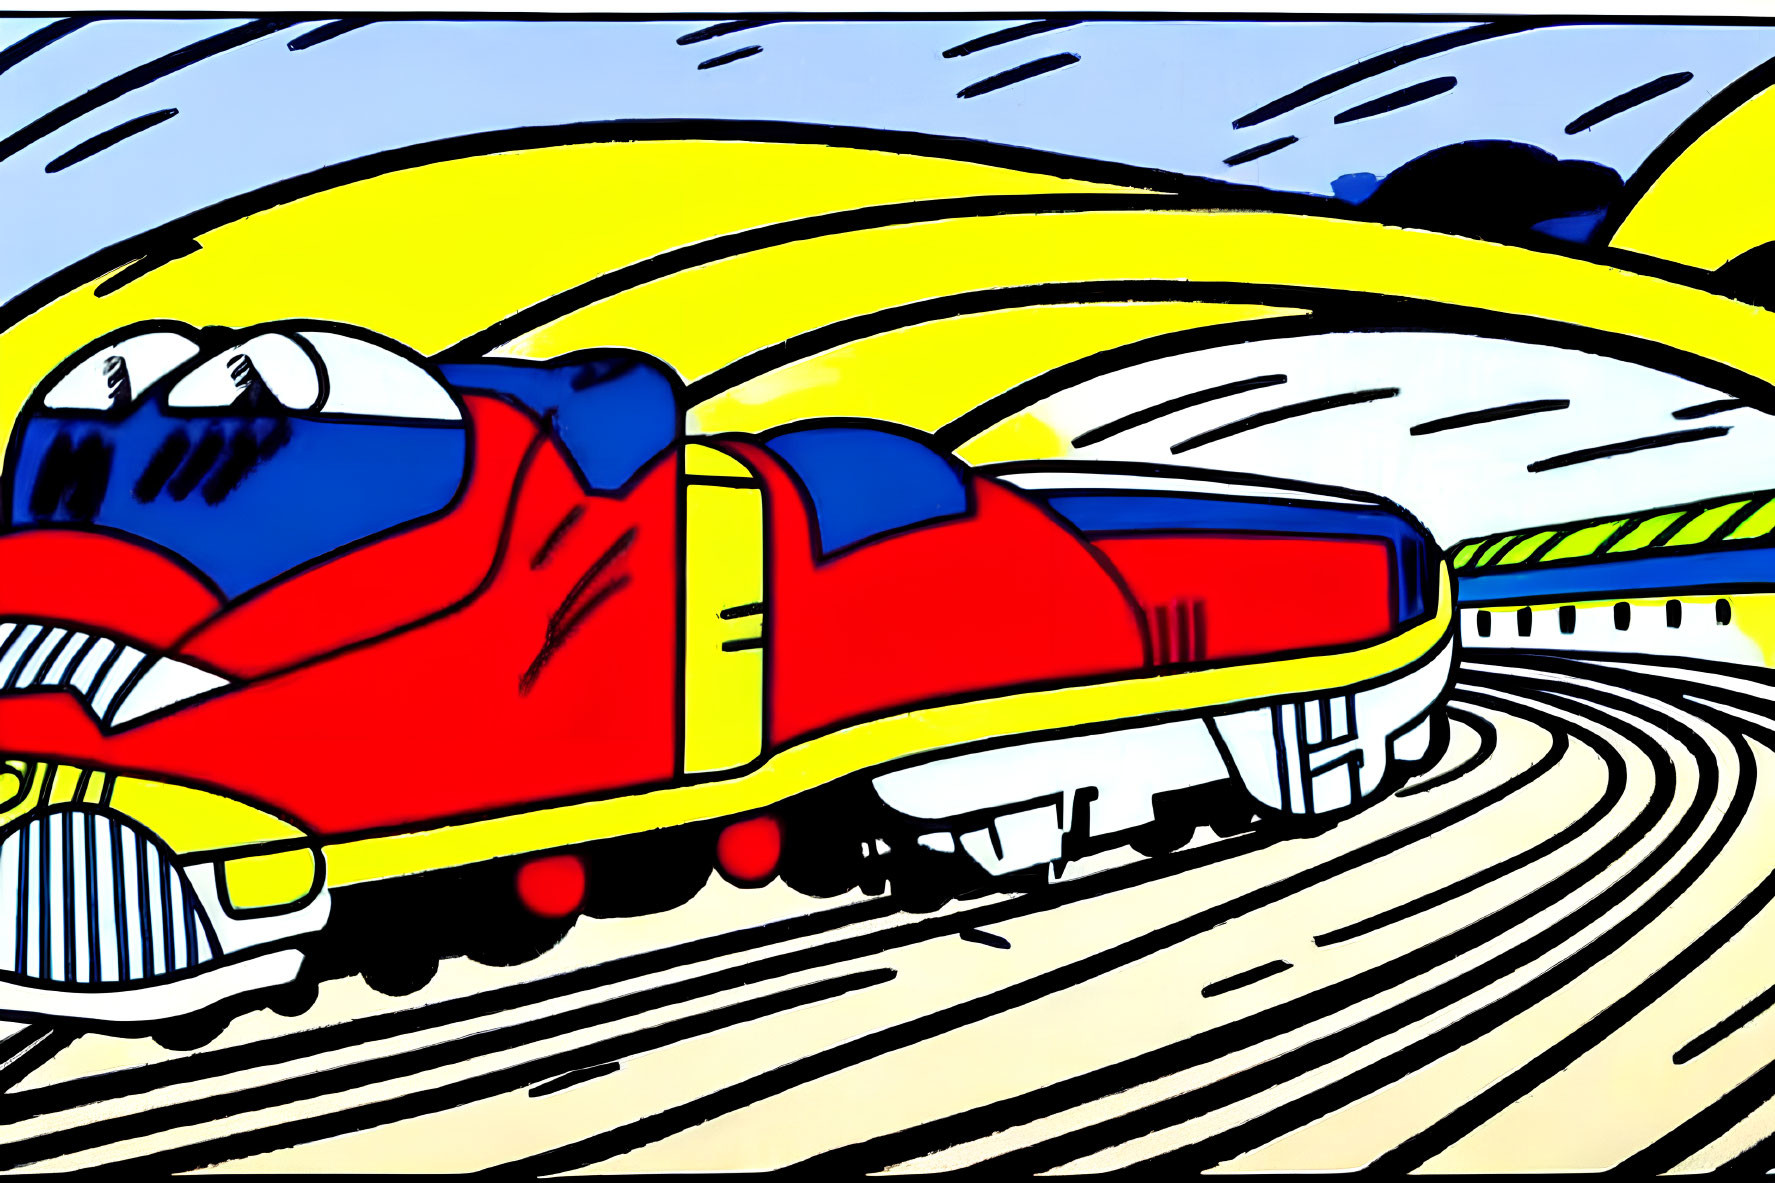 Colorful Cartoon Train Traveling Through Curved Landscape